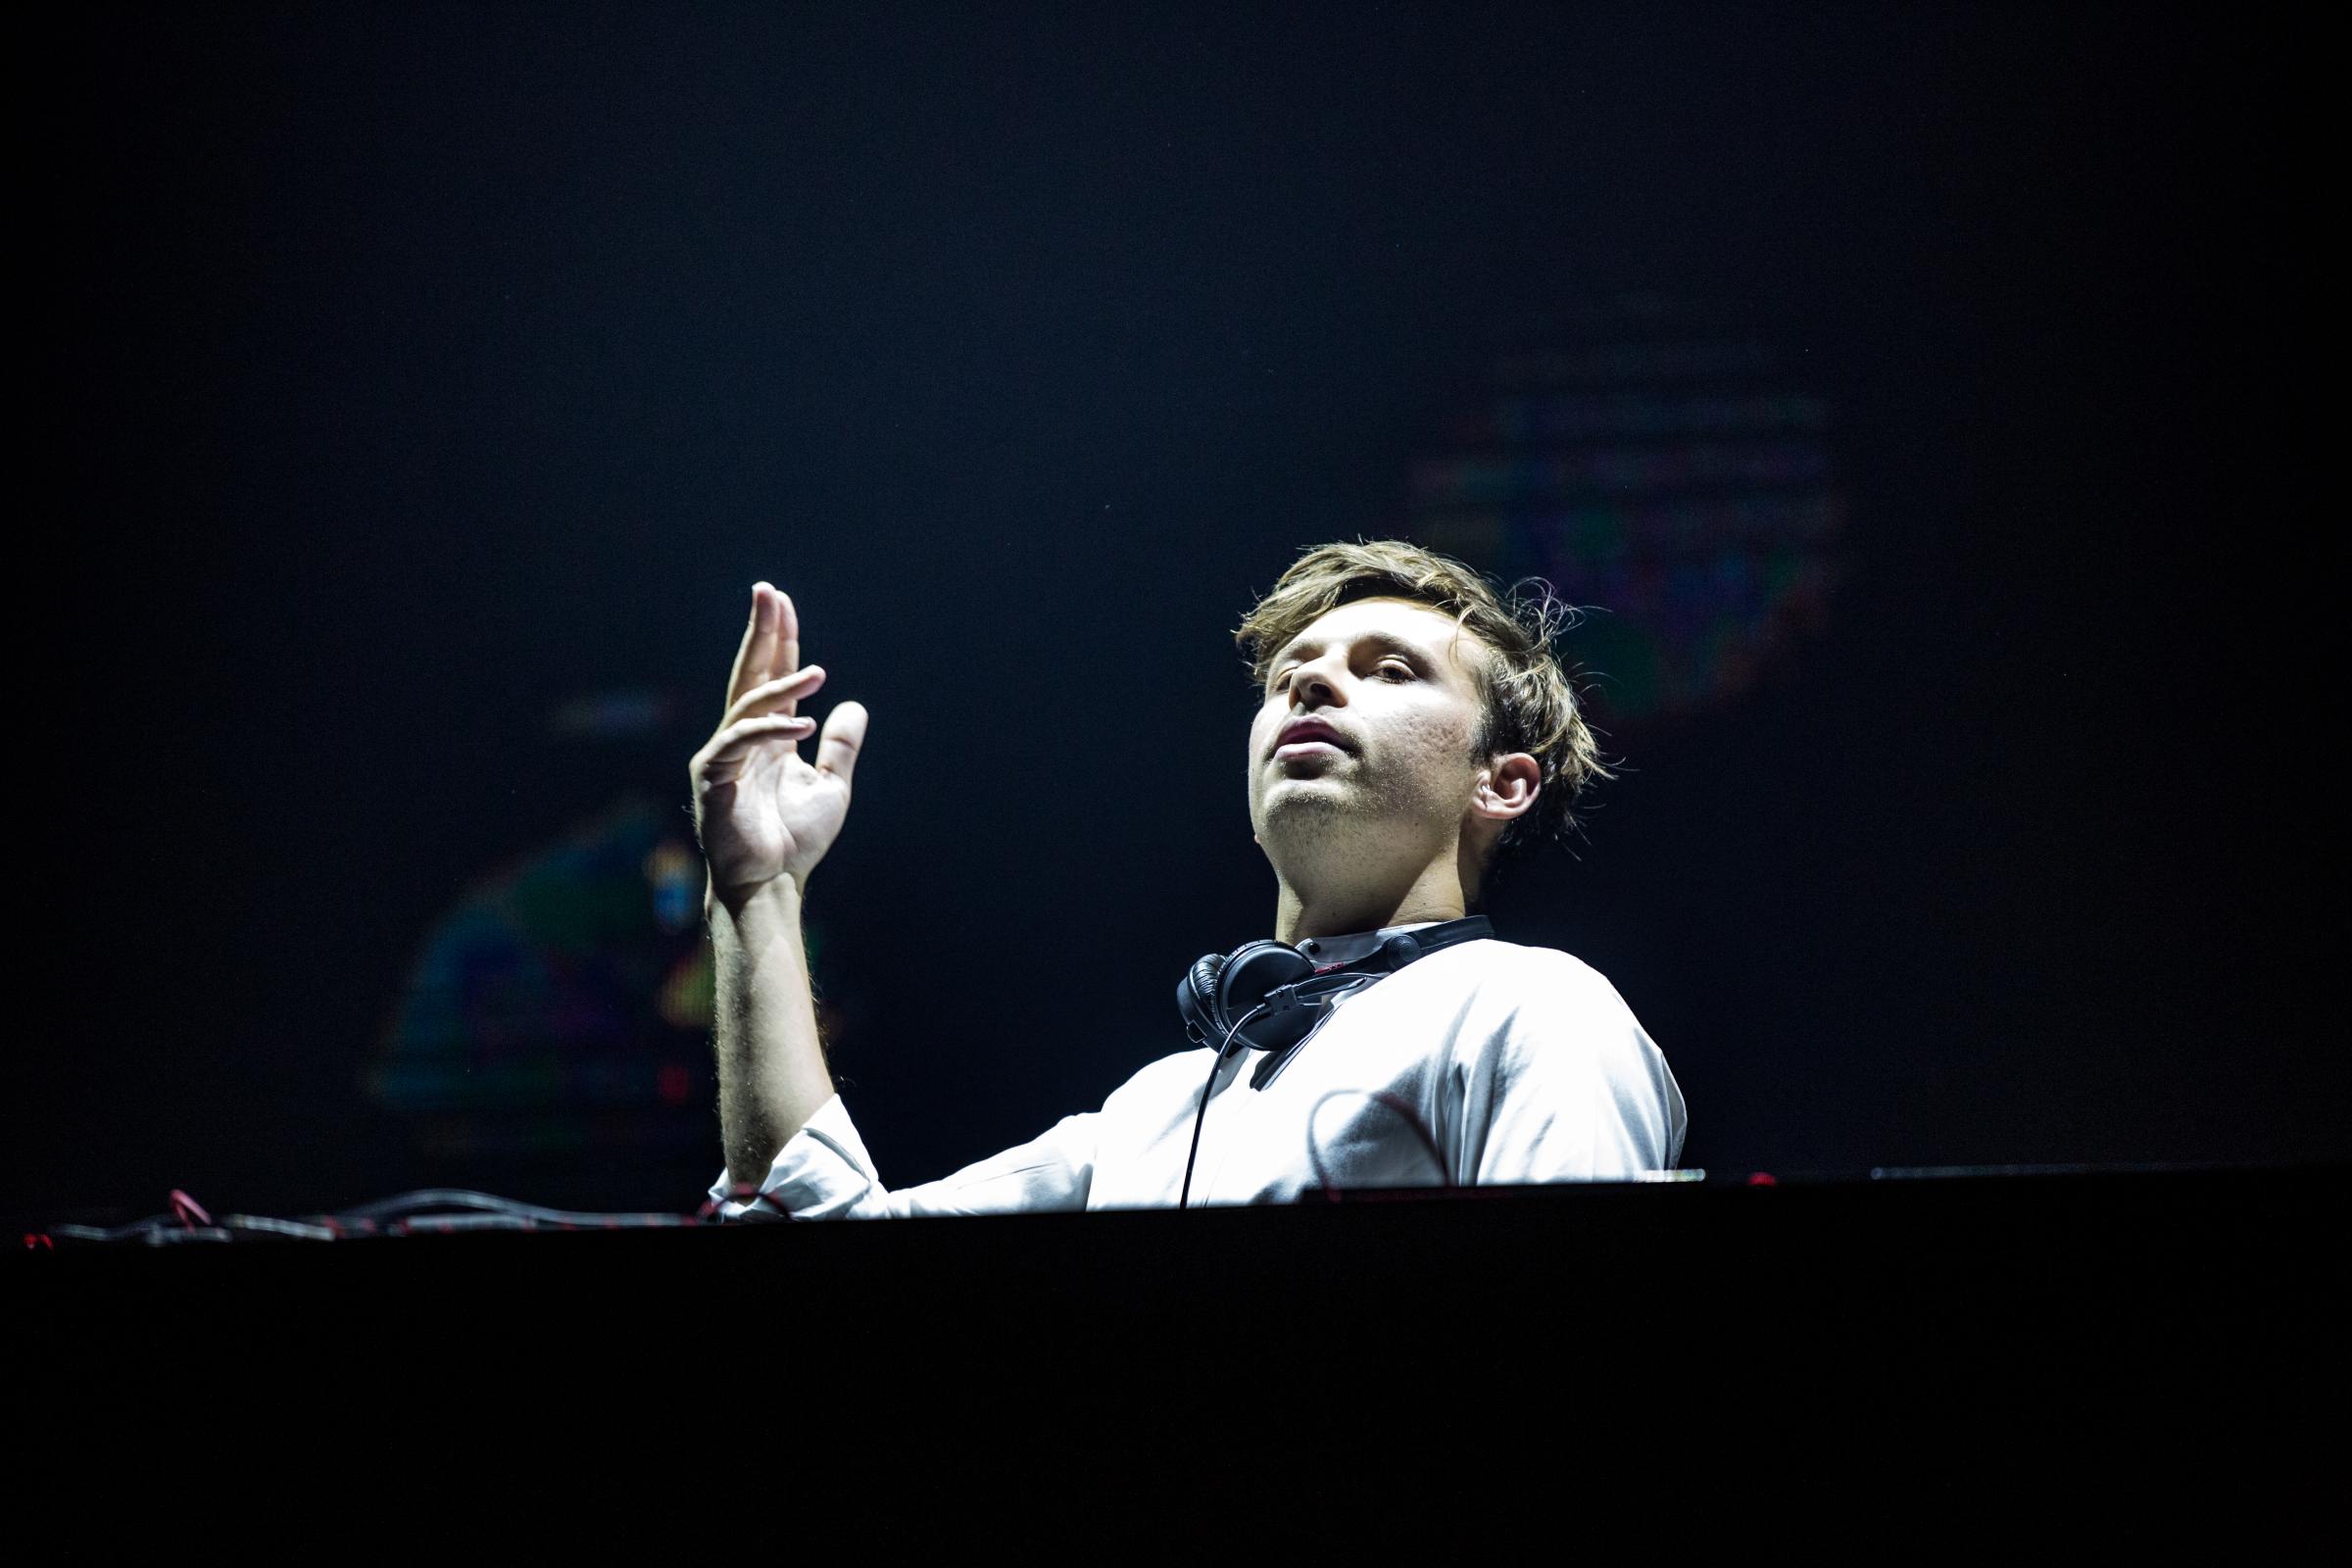 Flume performs at the Creamfields festival on December 16, 2017 in Hong Kong.Photo by Aria Hangyu Chen for TIME.